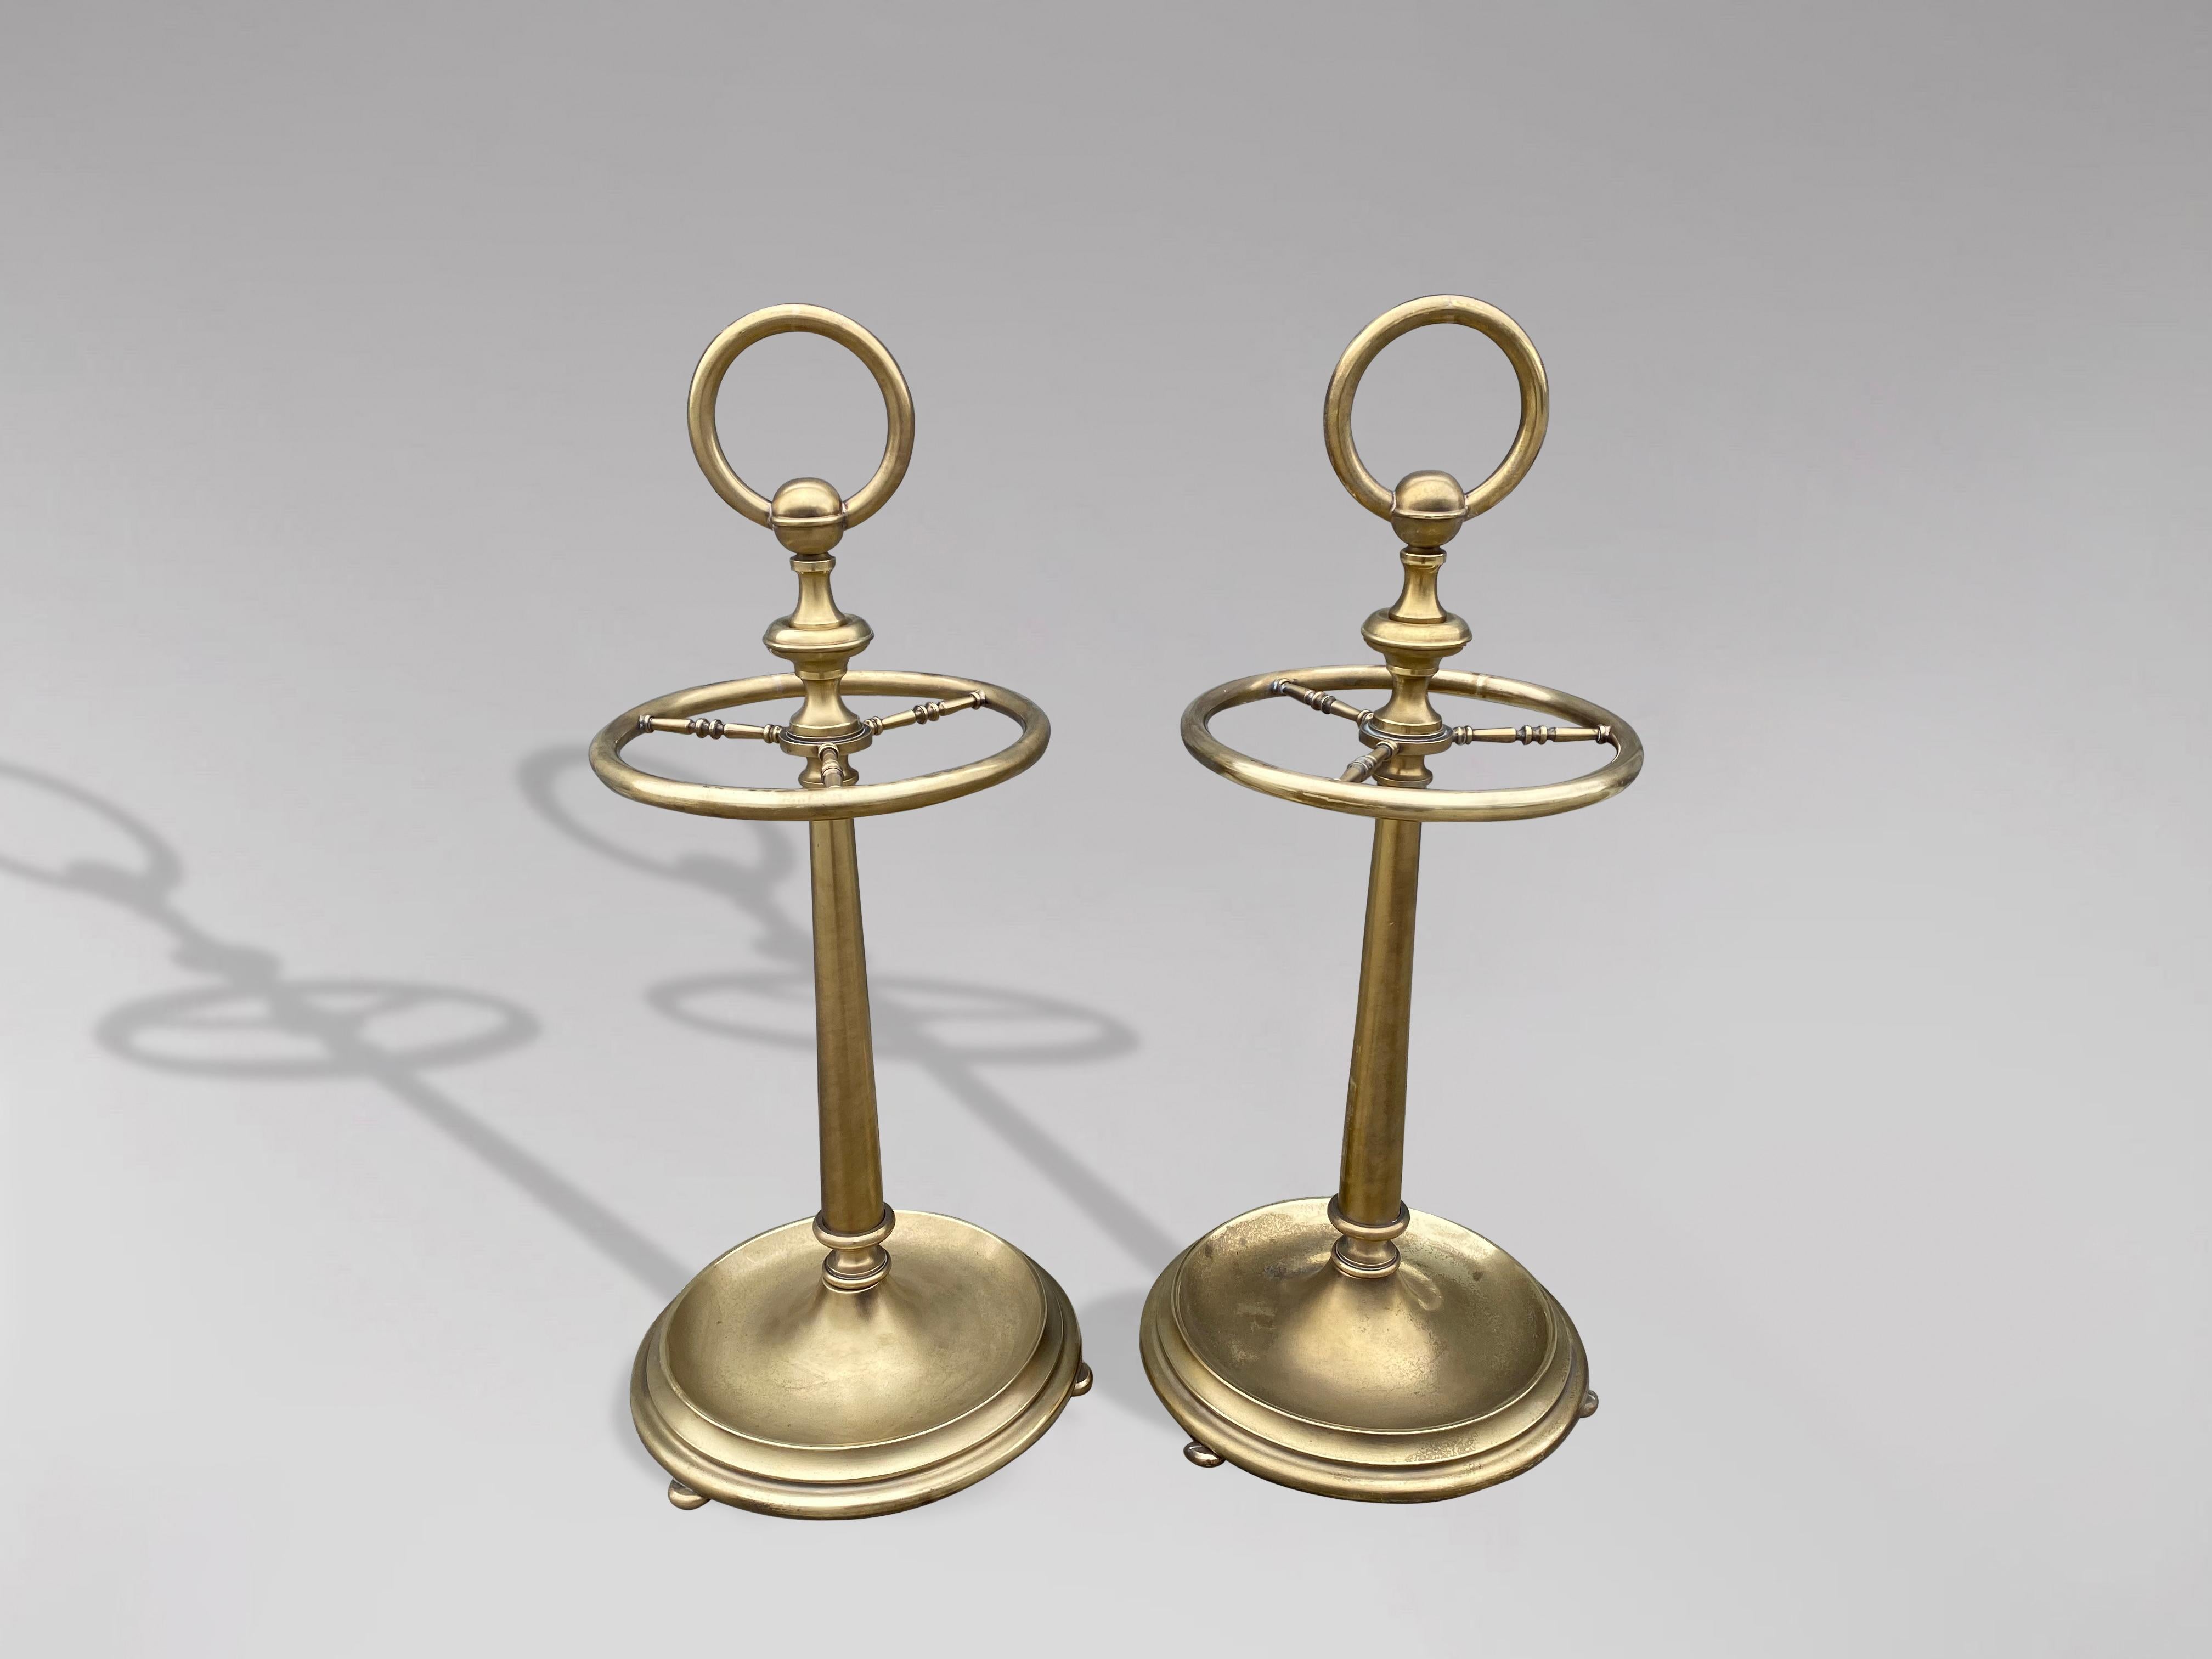 A pair of 20th century brass umbrella stands or stick stands. Polished brass large circular handle above a top divided into four sections to hold either walking sticks or umbrellas. Circular umbrella brass valet rack with four sections and large